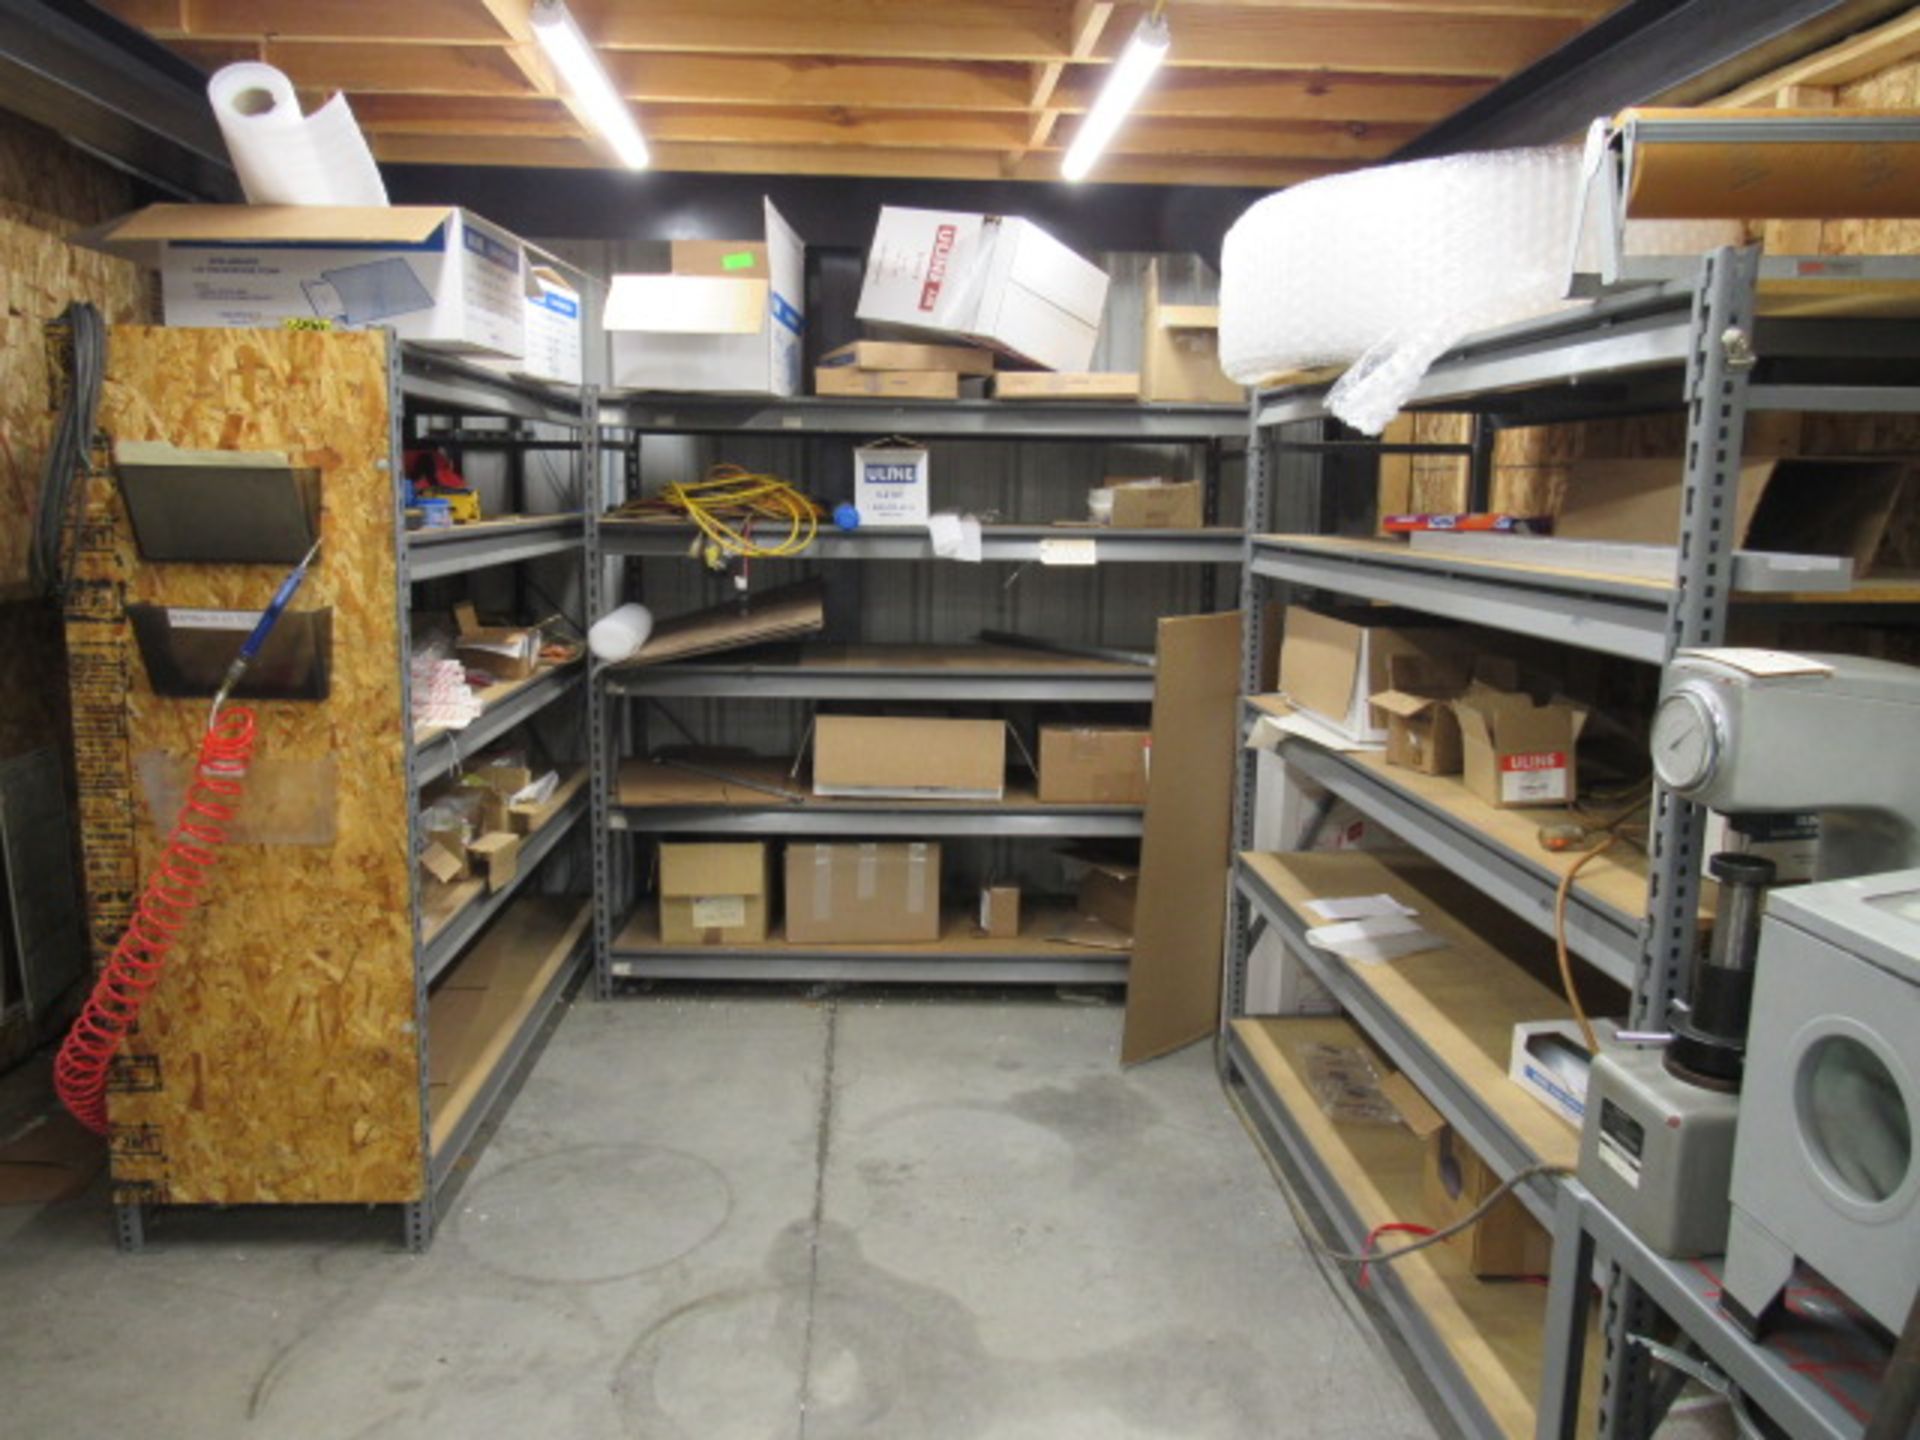 3 Shelves with Shipping Supplies